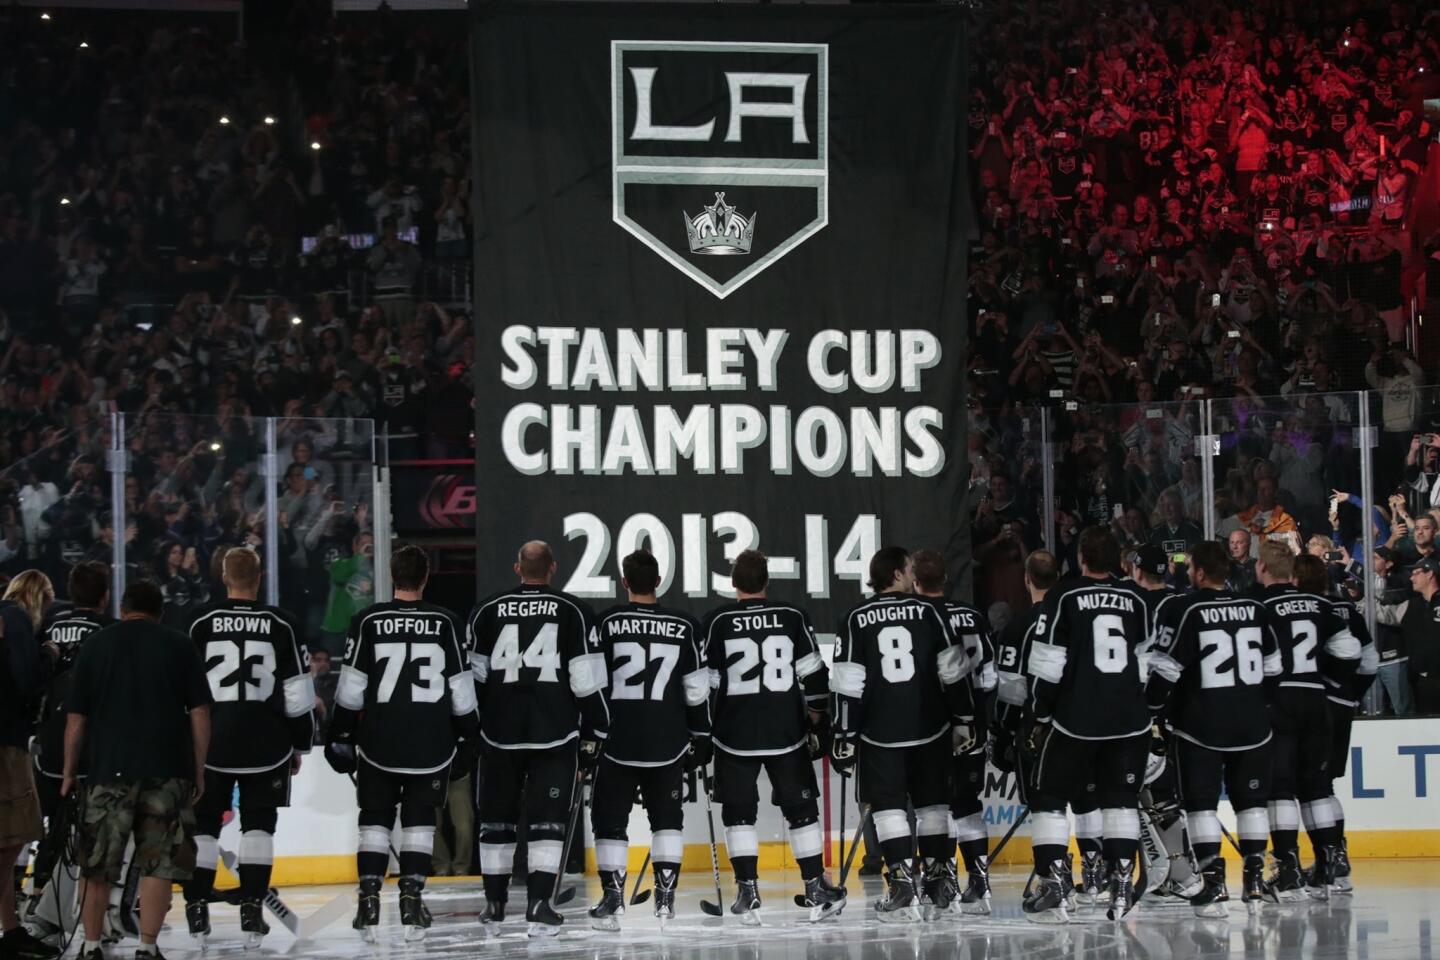 2012 Stanley Cup Final Champions Banner Los Angeles Kings Opening